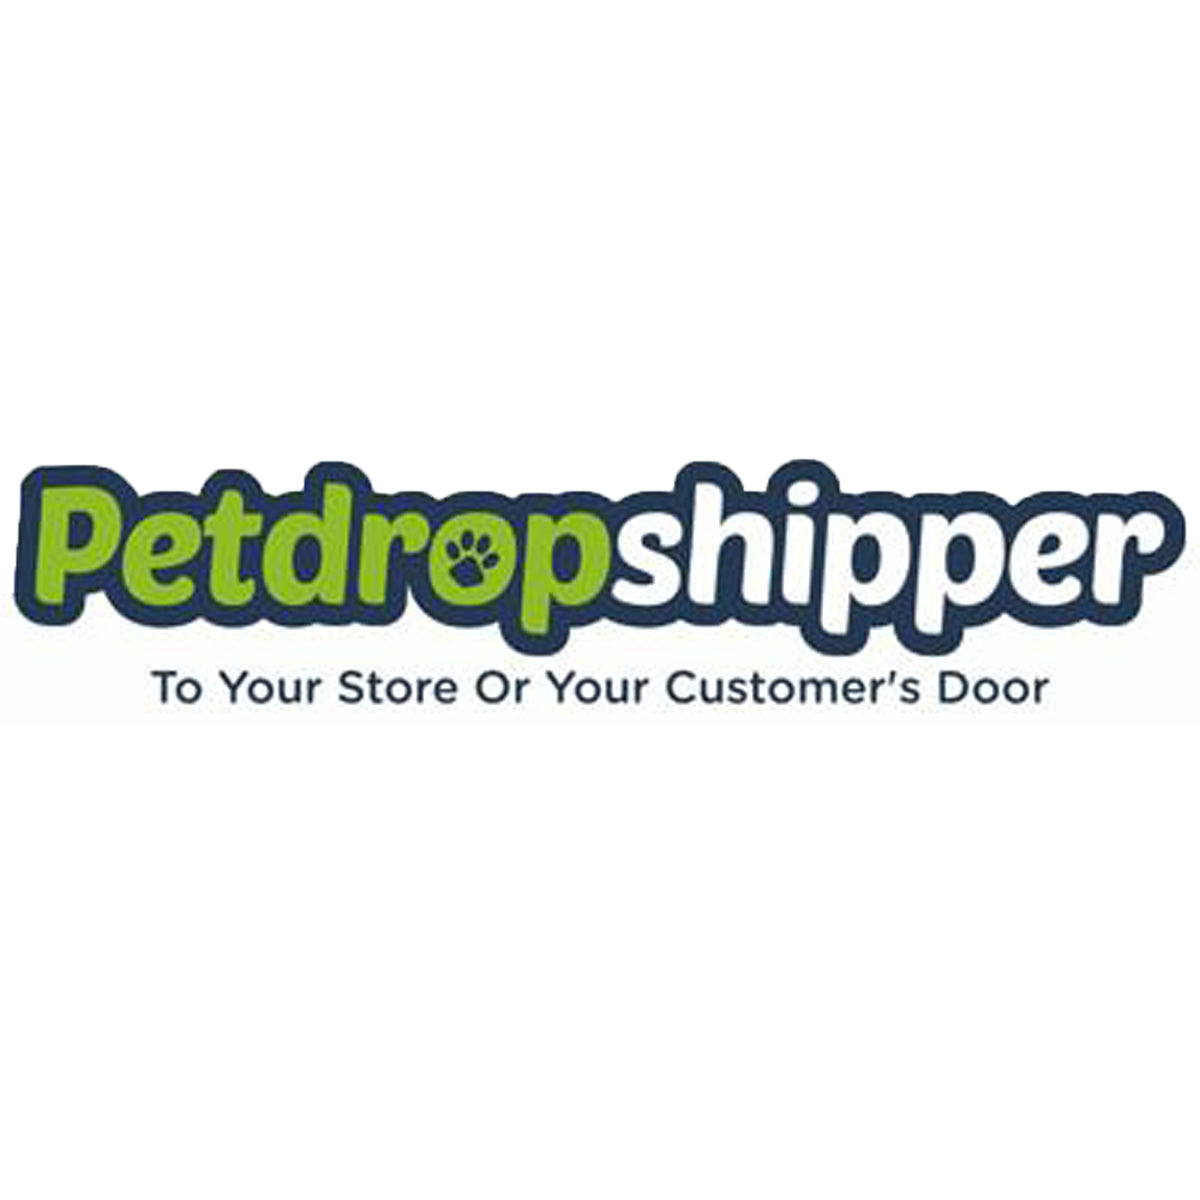 Hire Shopify Experts to integrate PetDropShipper app into a Shopify store